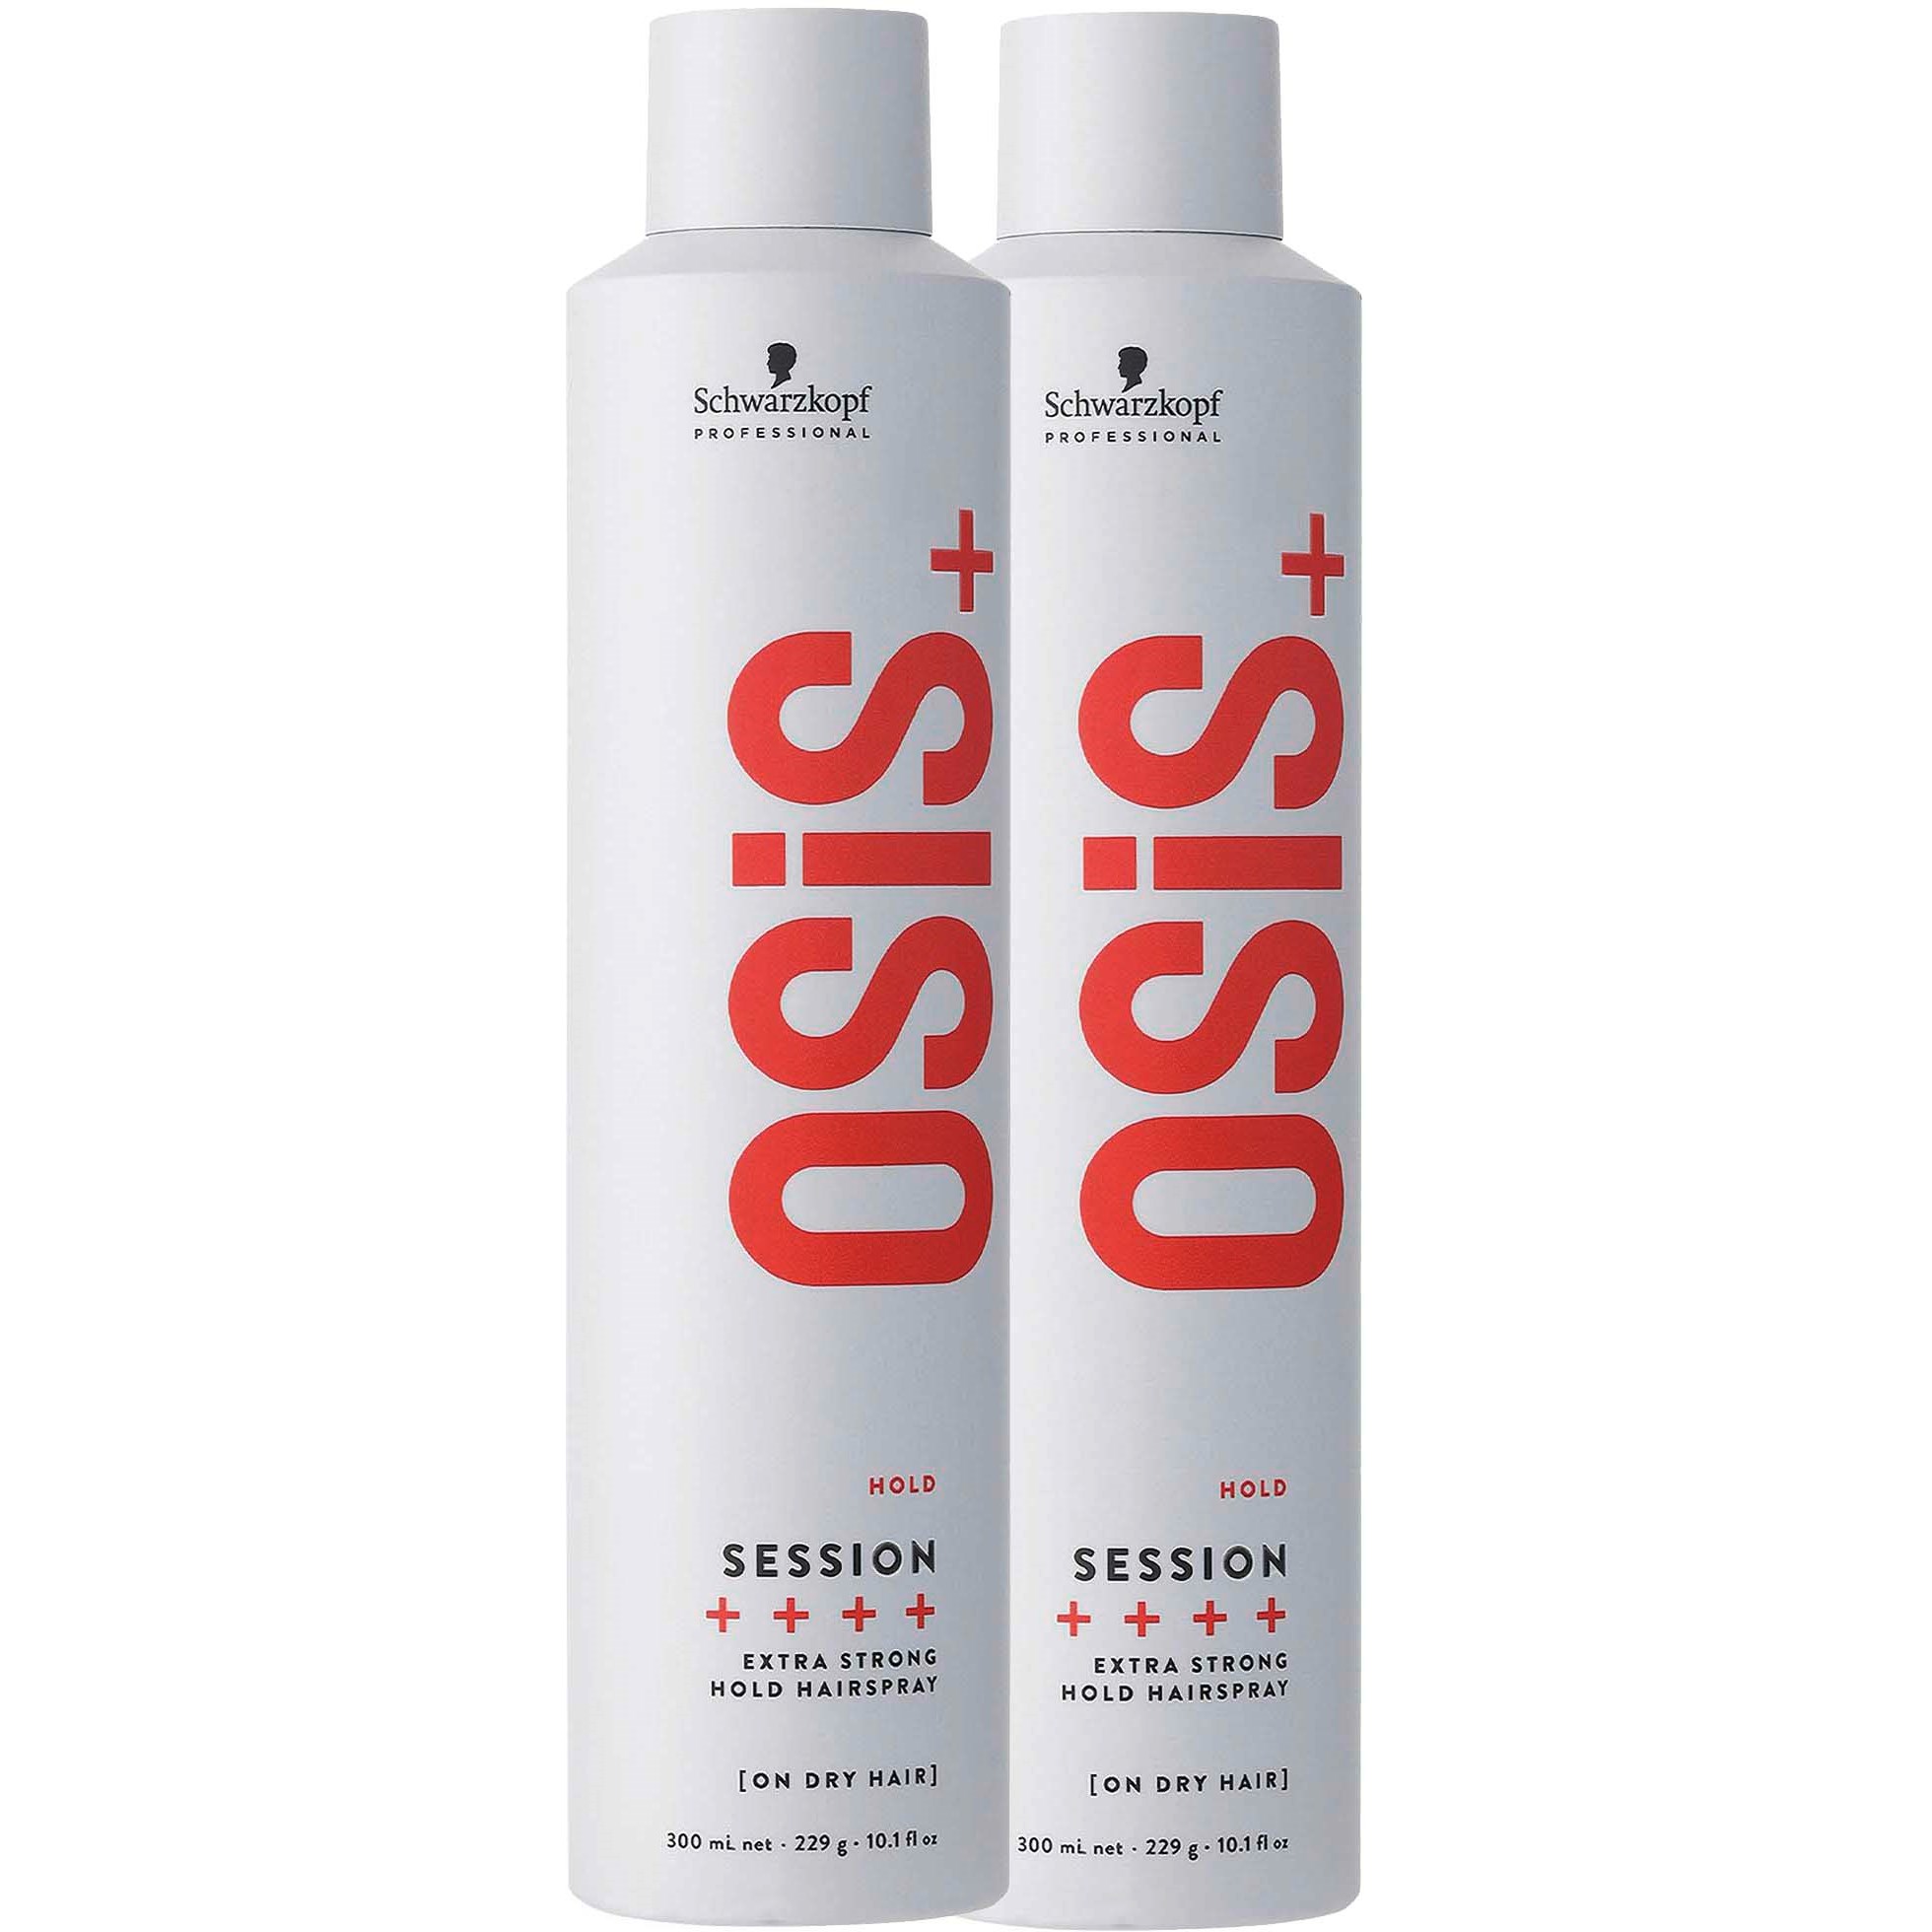 Schwarzkopf Professional OSiS Session Duo